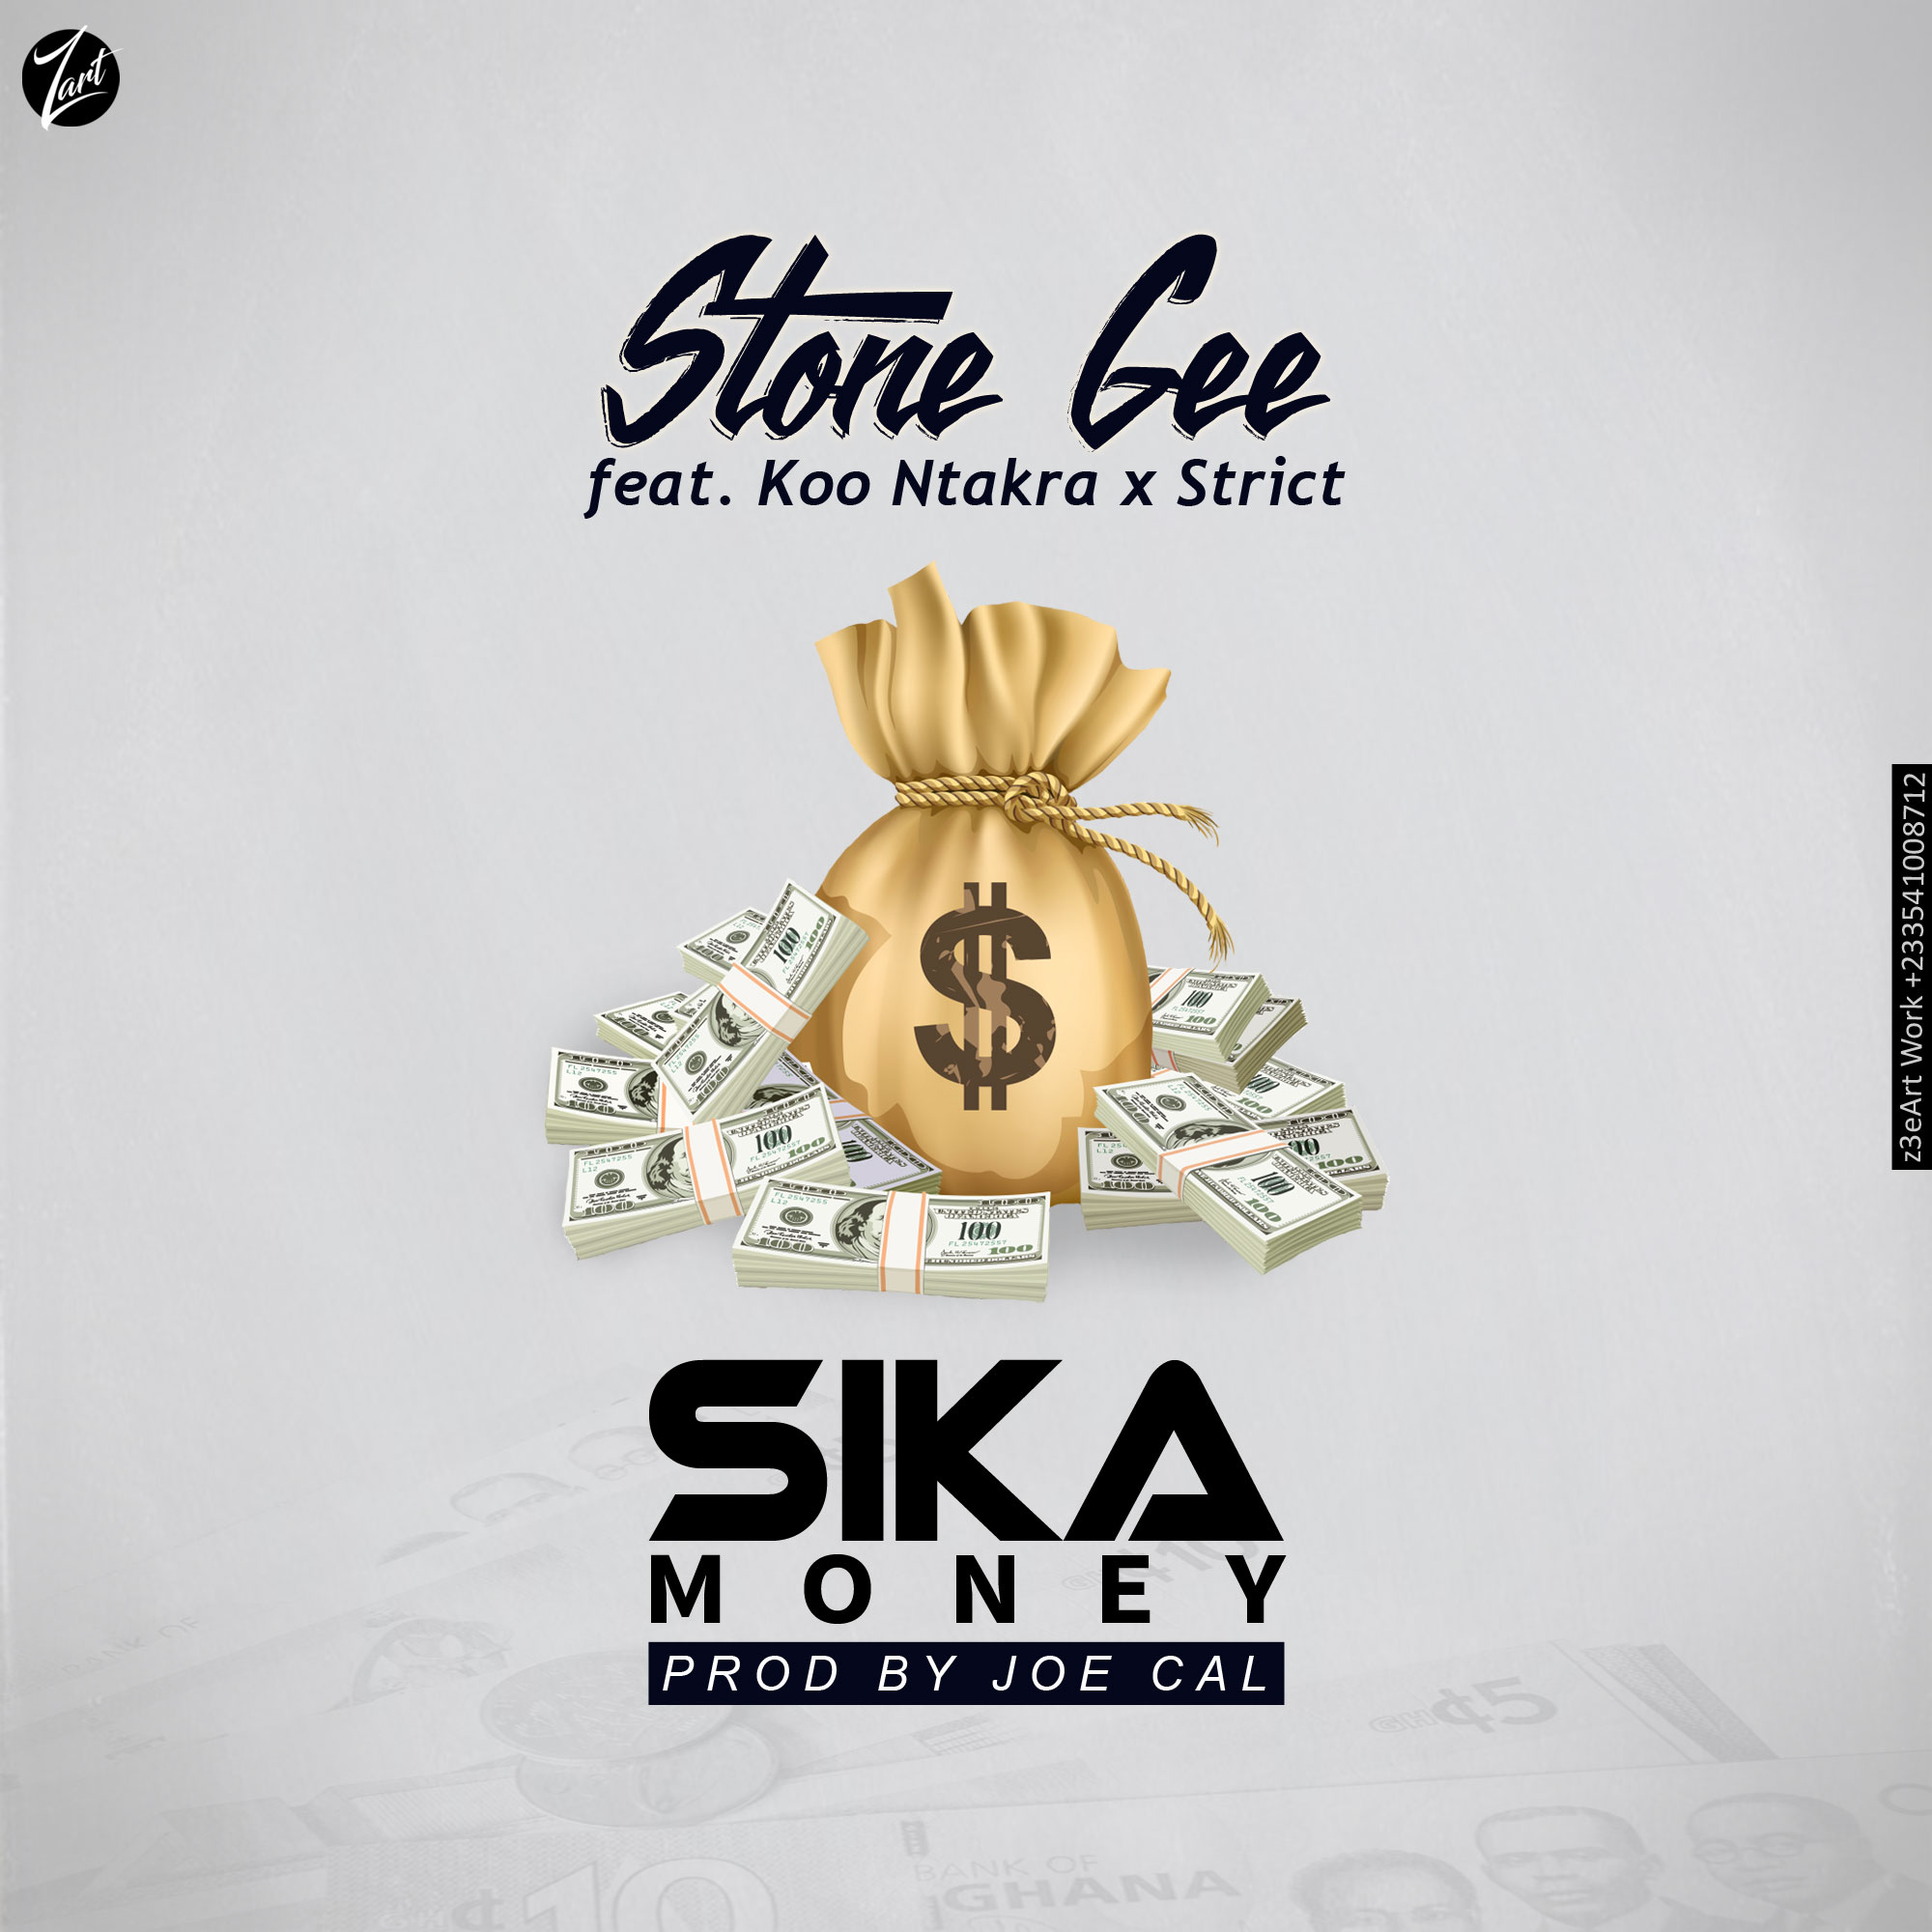 Stone Gee Feat